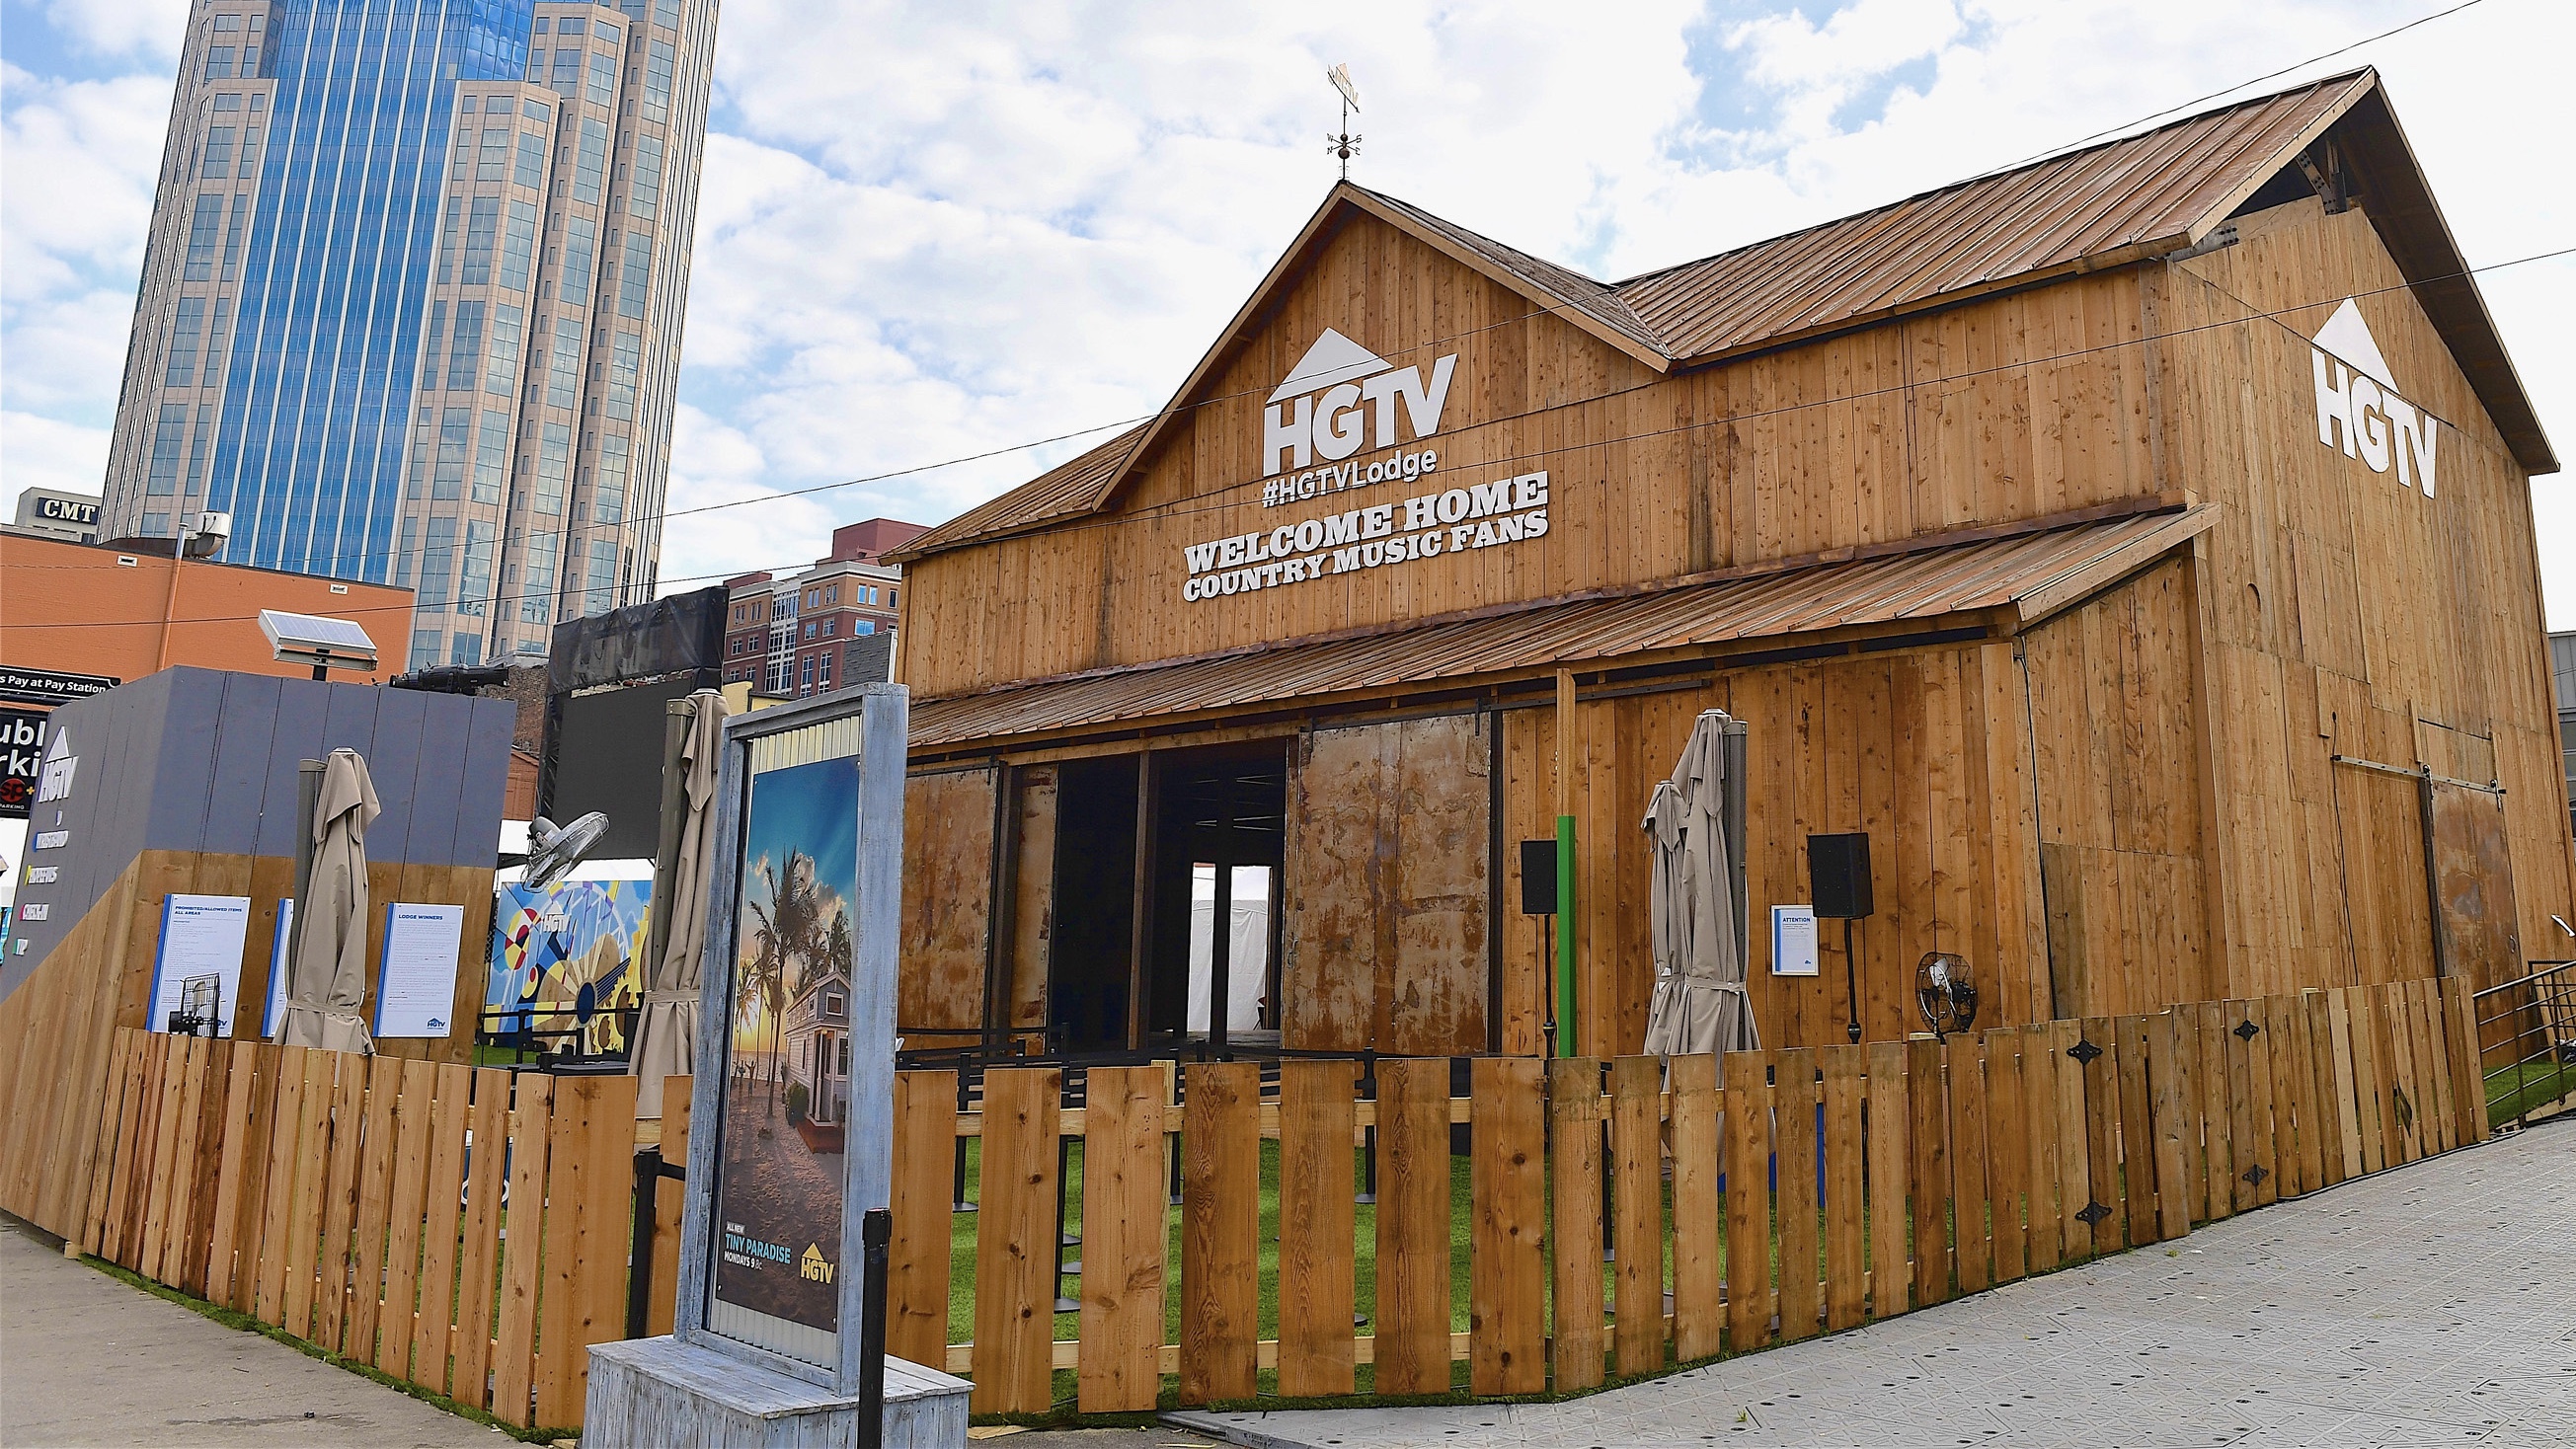 Dierks Bentley, Chris Young, Lauren Alaina + The Brady Bunch Among Guests Appearing at the HGTV Lodge at CMA Fest 2019